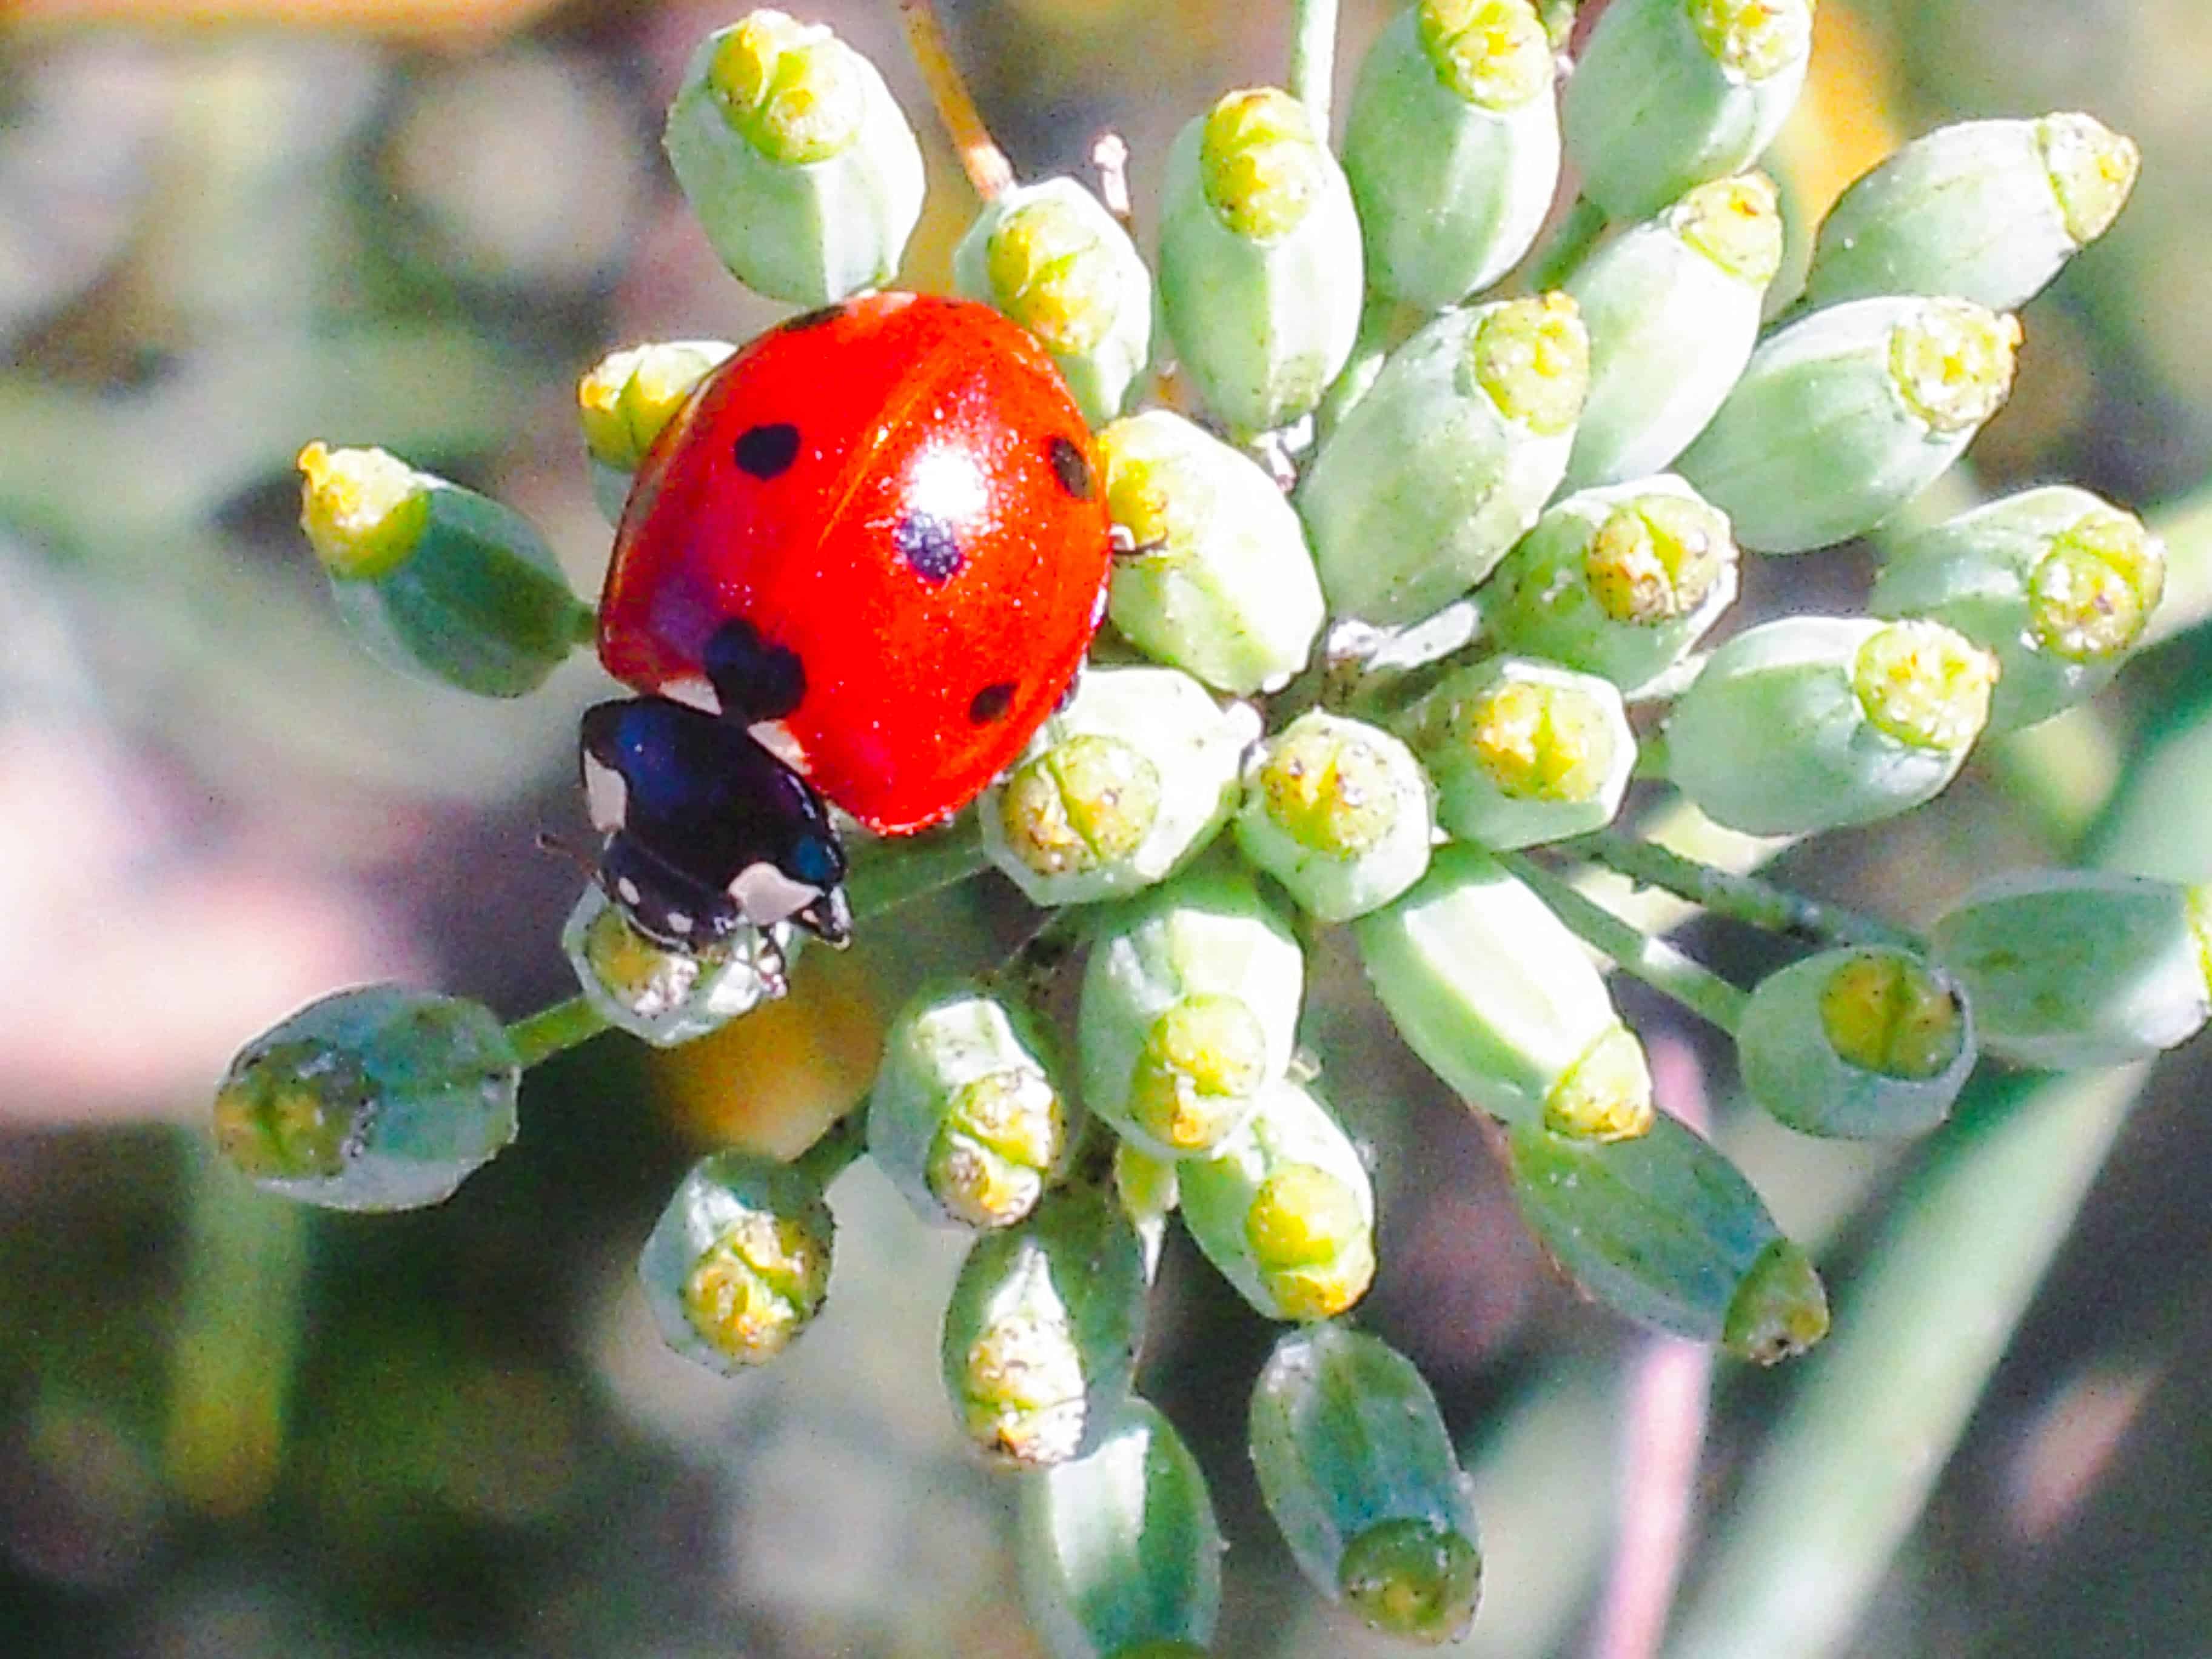 close up of a ladybug on an anise plant